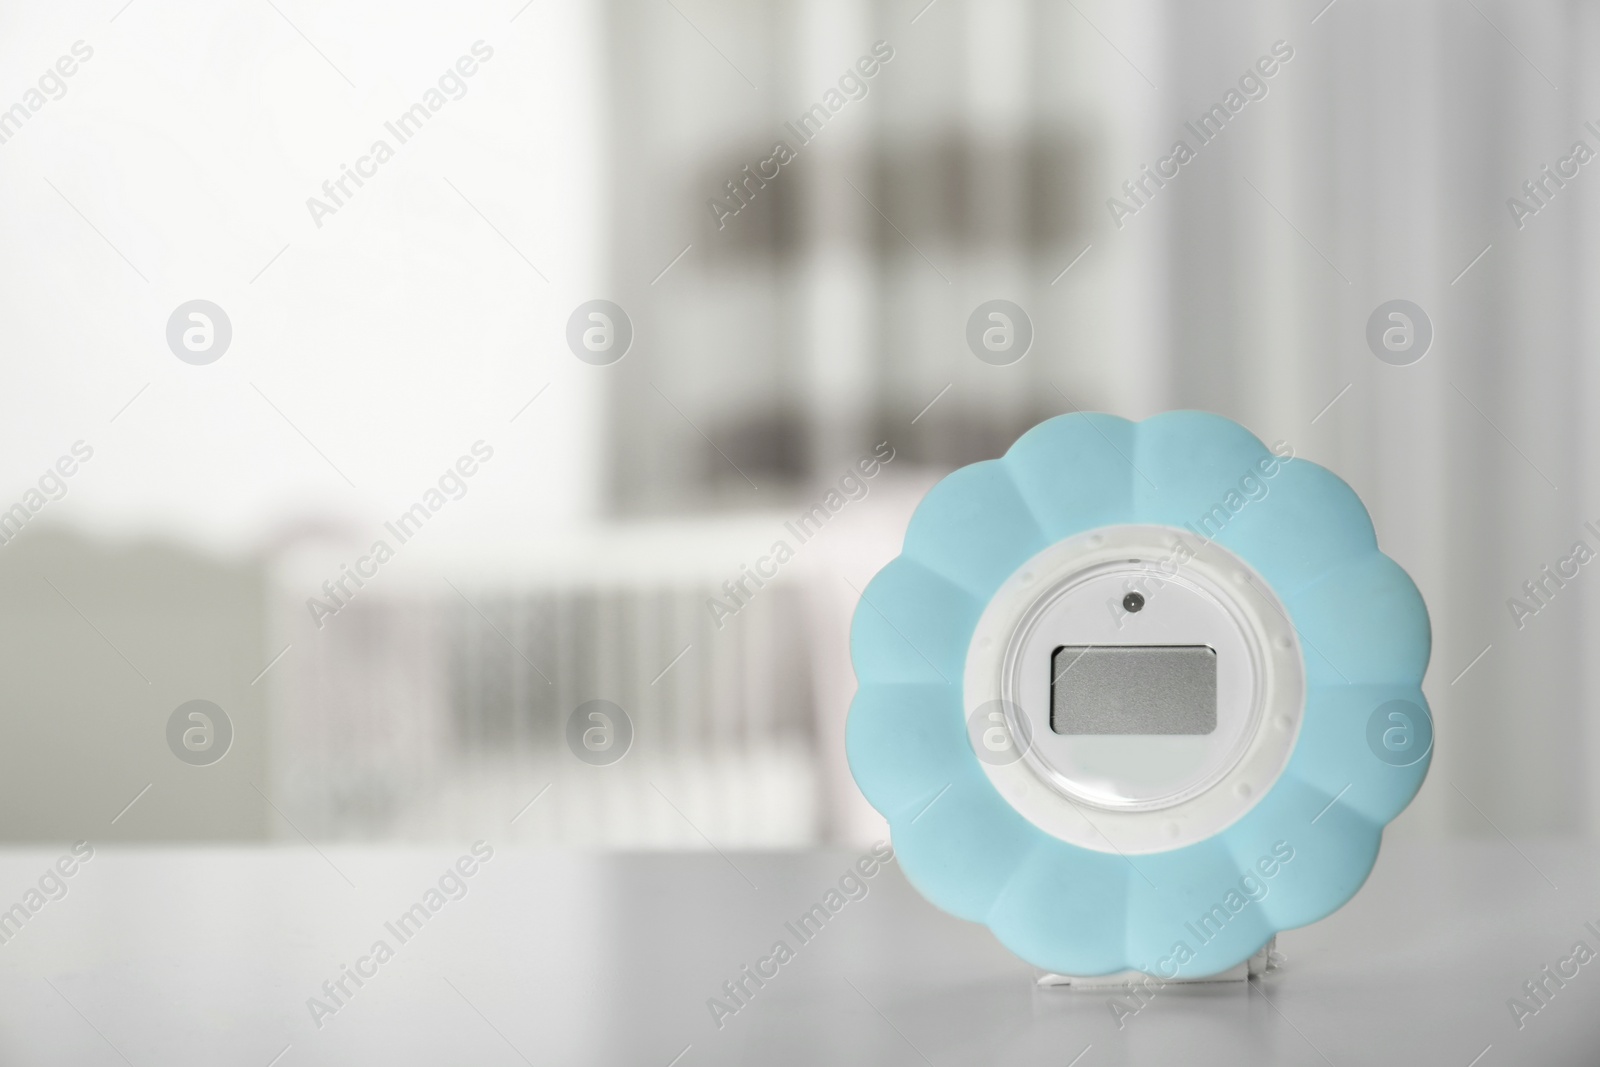 Photo of Digital temperature and humidity control in baby room interior. Space for text